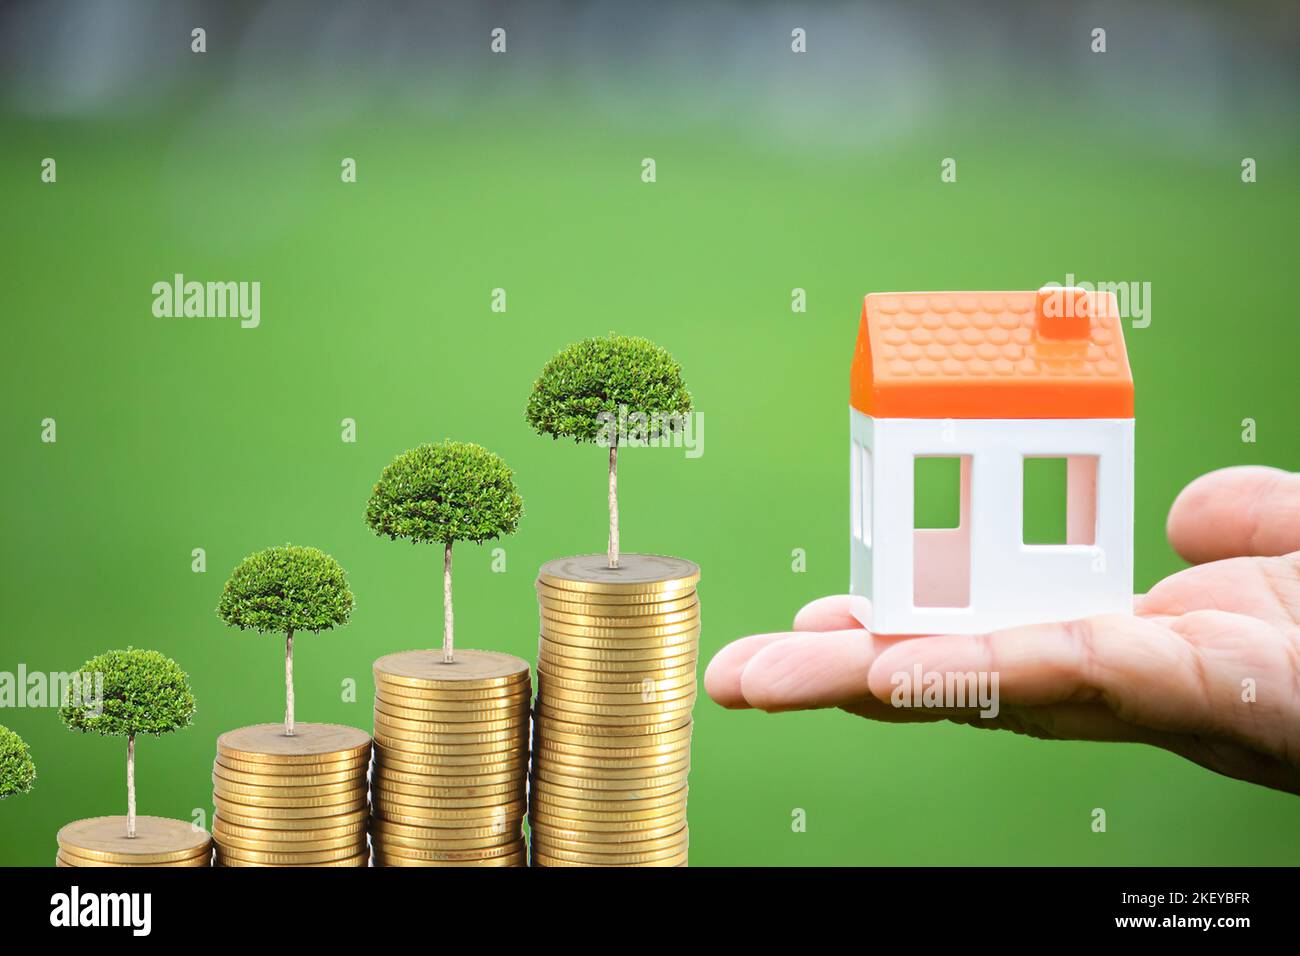 Rising house prices idea concept. Trees and top house model on stacked coins against green background. Real estate and money affairs in Turkey. Stock Photo